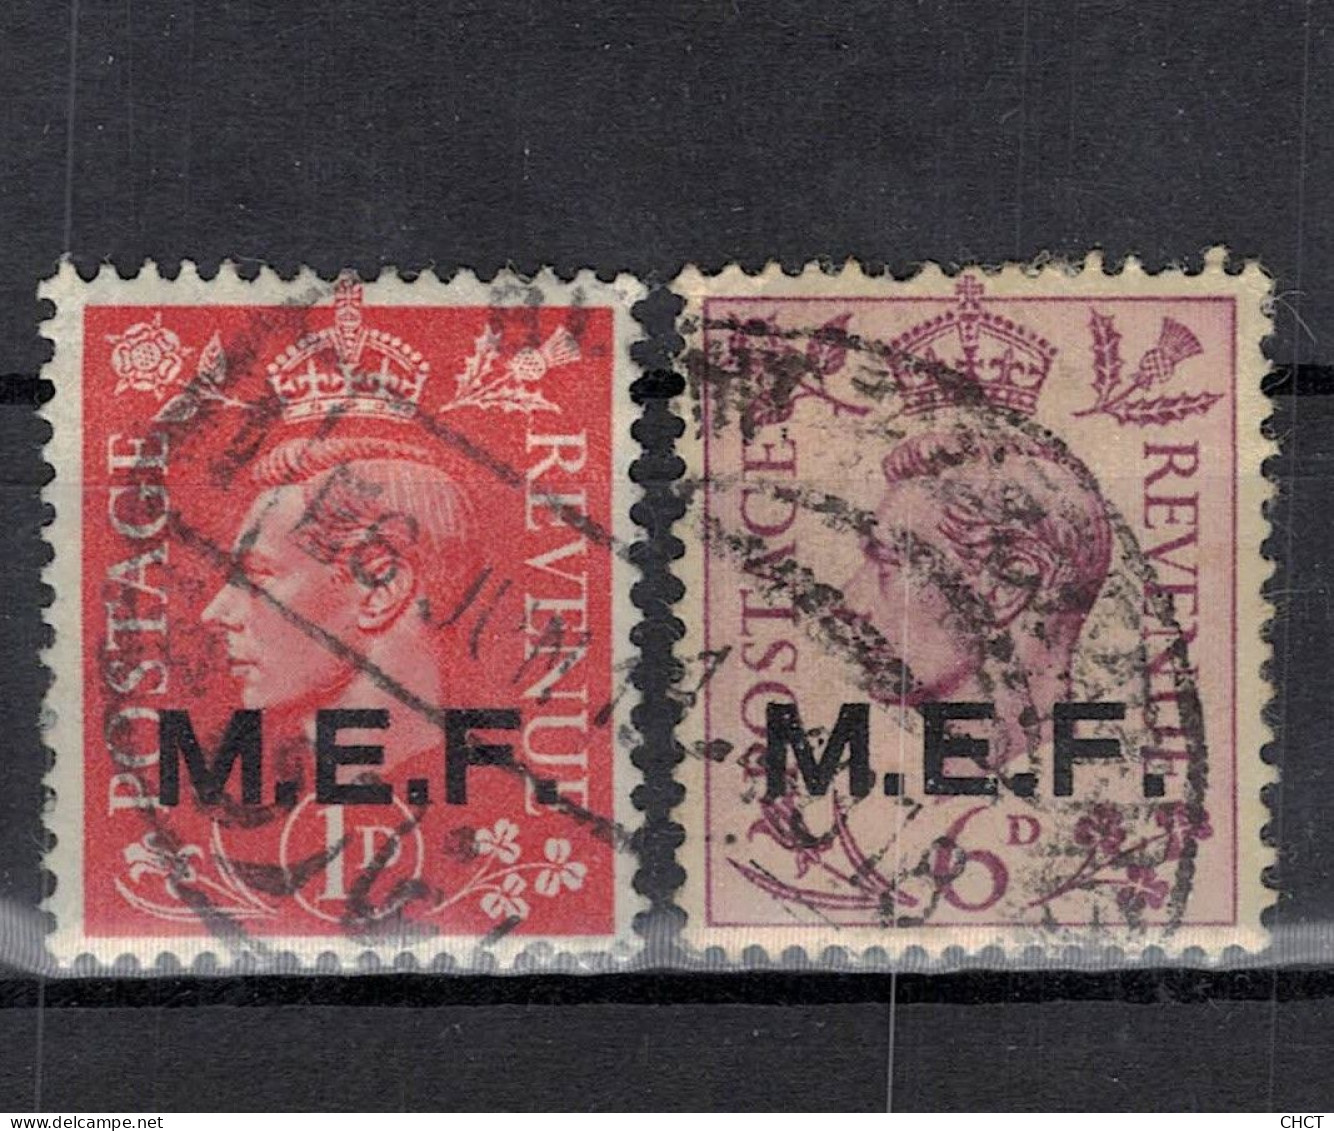 CHCT28 -  British Occupation Of Italian Colonies, Middle East Forces, 1934, Britain - Revenue Stamps